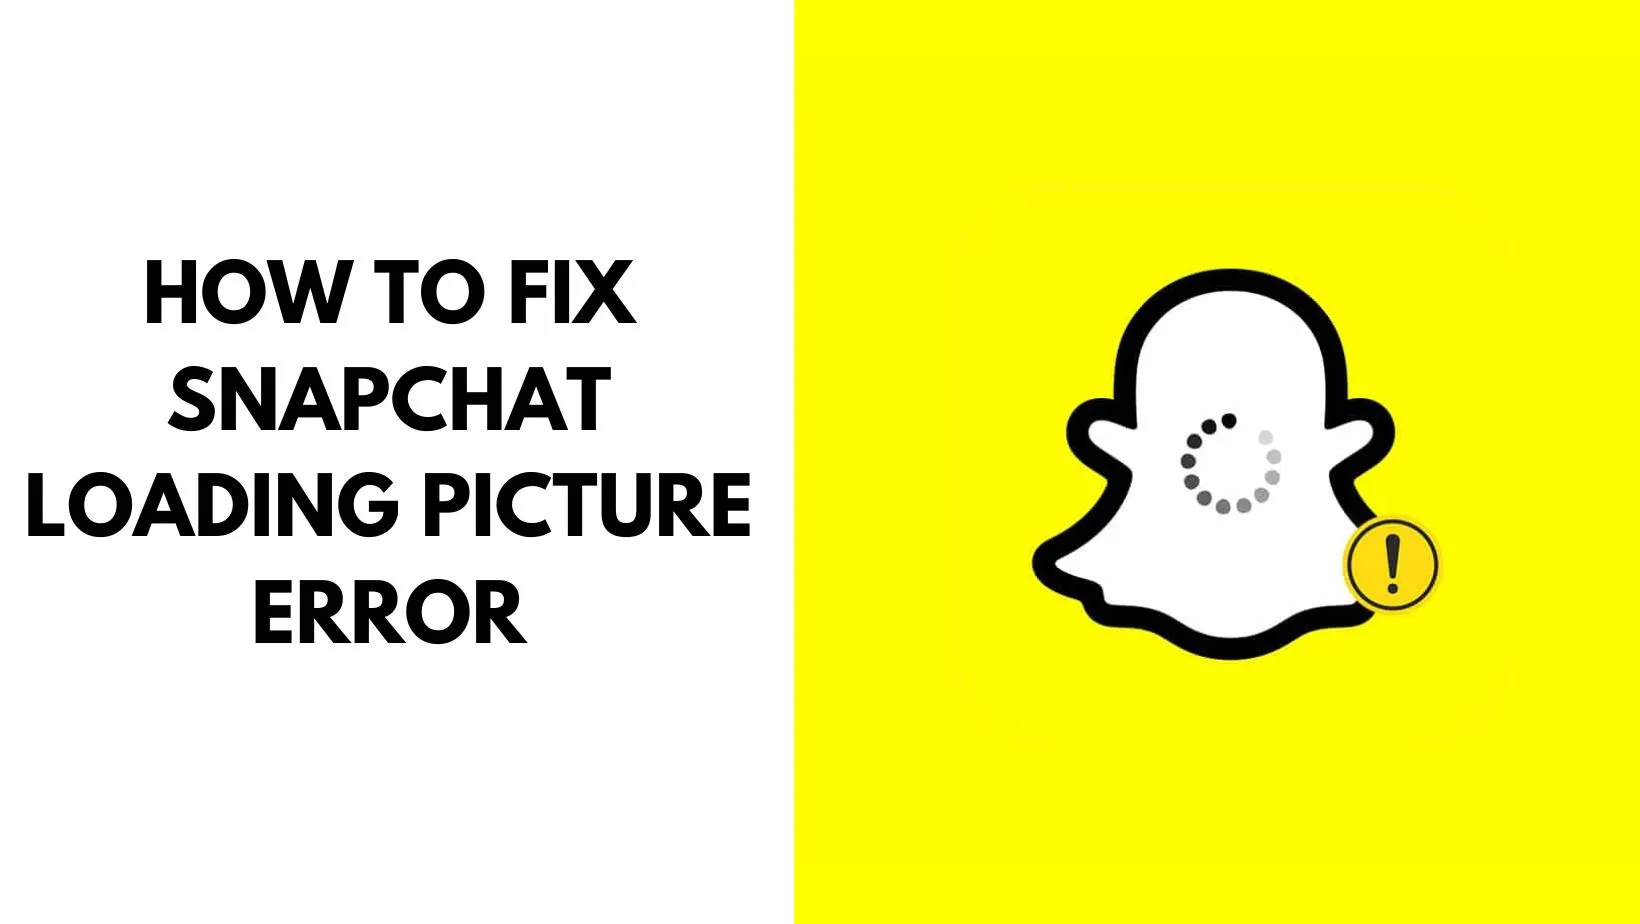 HOW TO FIX SNAPCHAT LOADING PICTURE ERROR